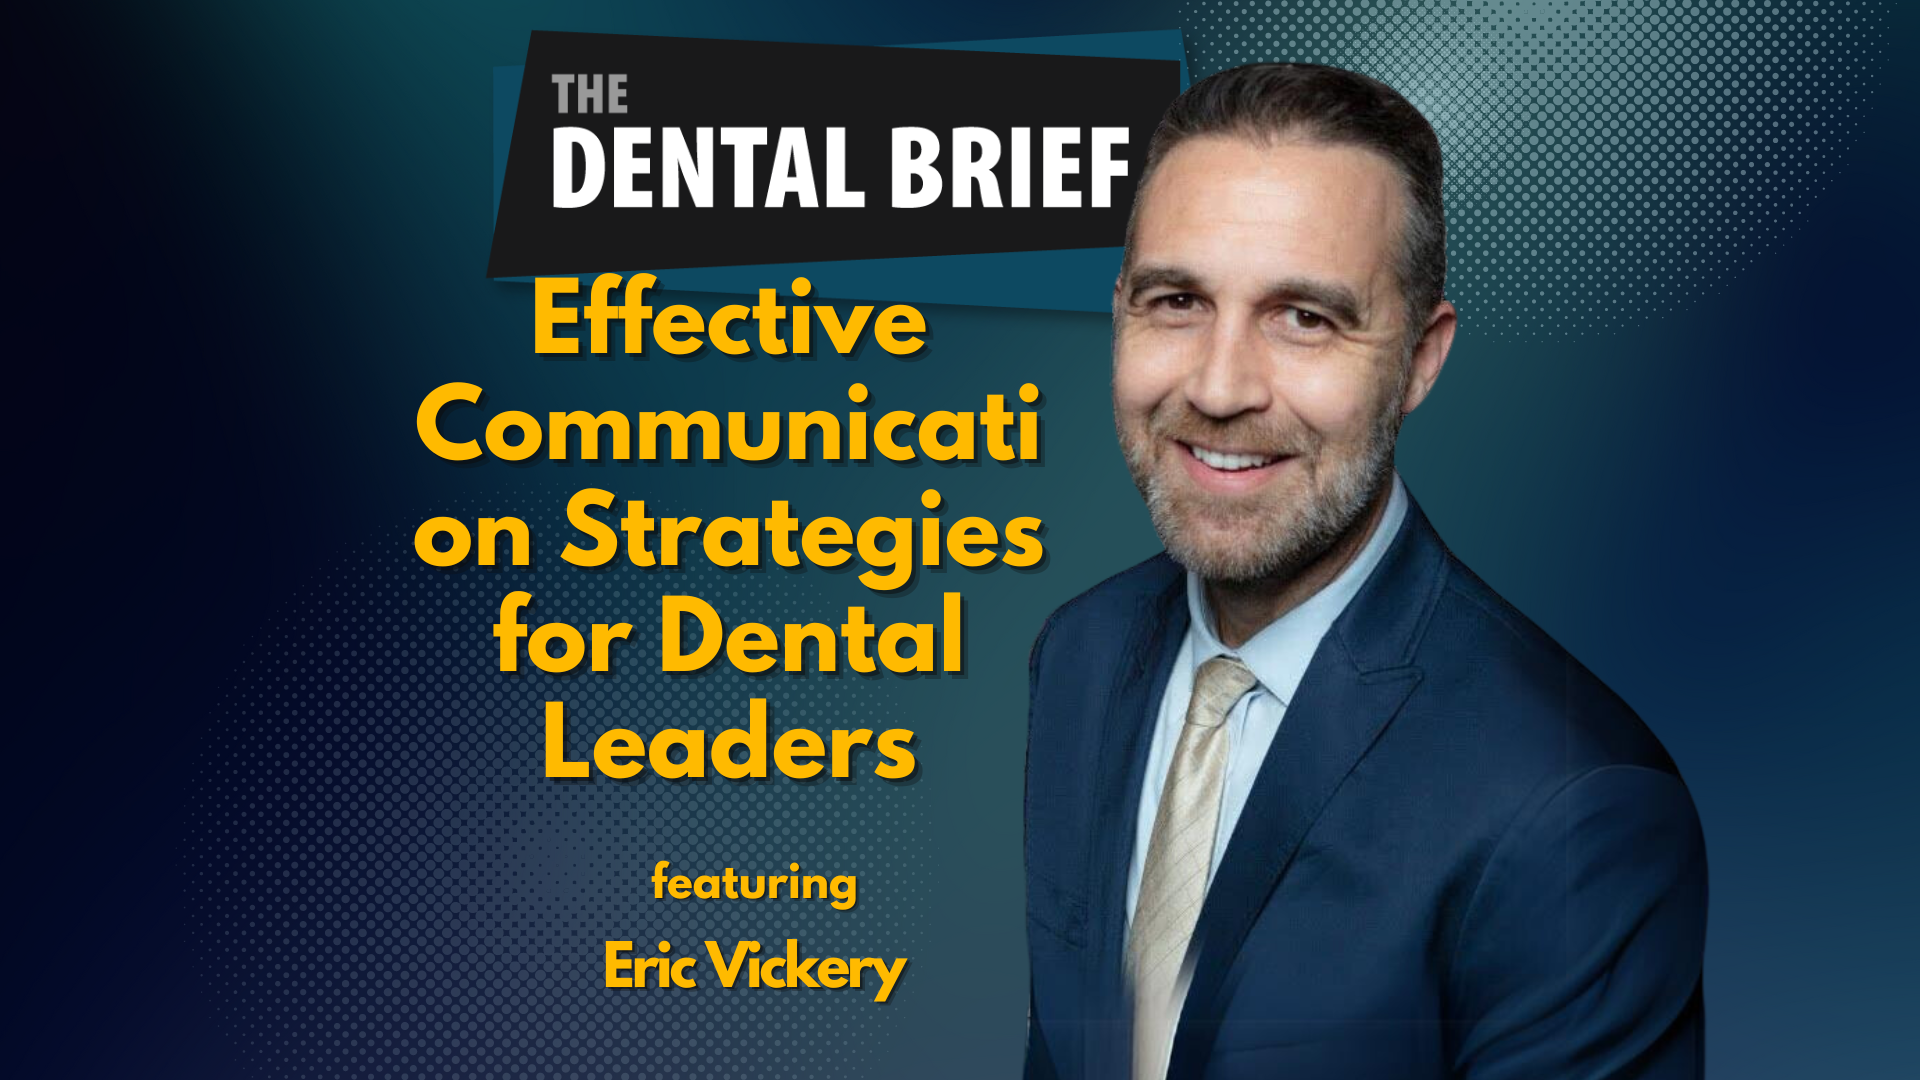 Thumbnail for "Effective Communication Strategies for Dental Leaders" a Dental Brief Podcast episode featuring Erick Vickery of All-Star Dental Academy